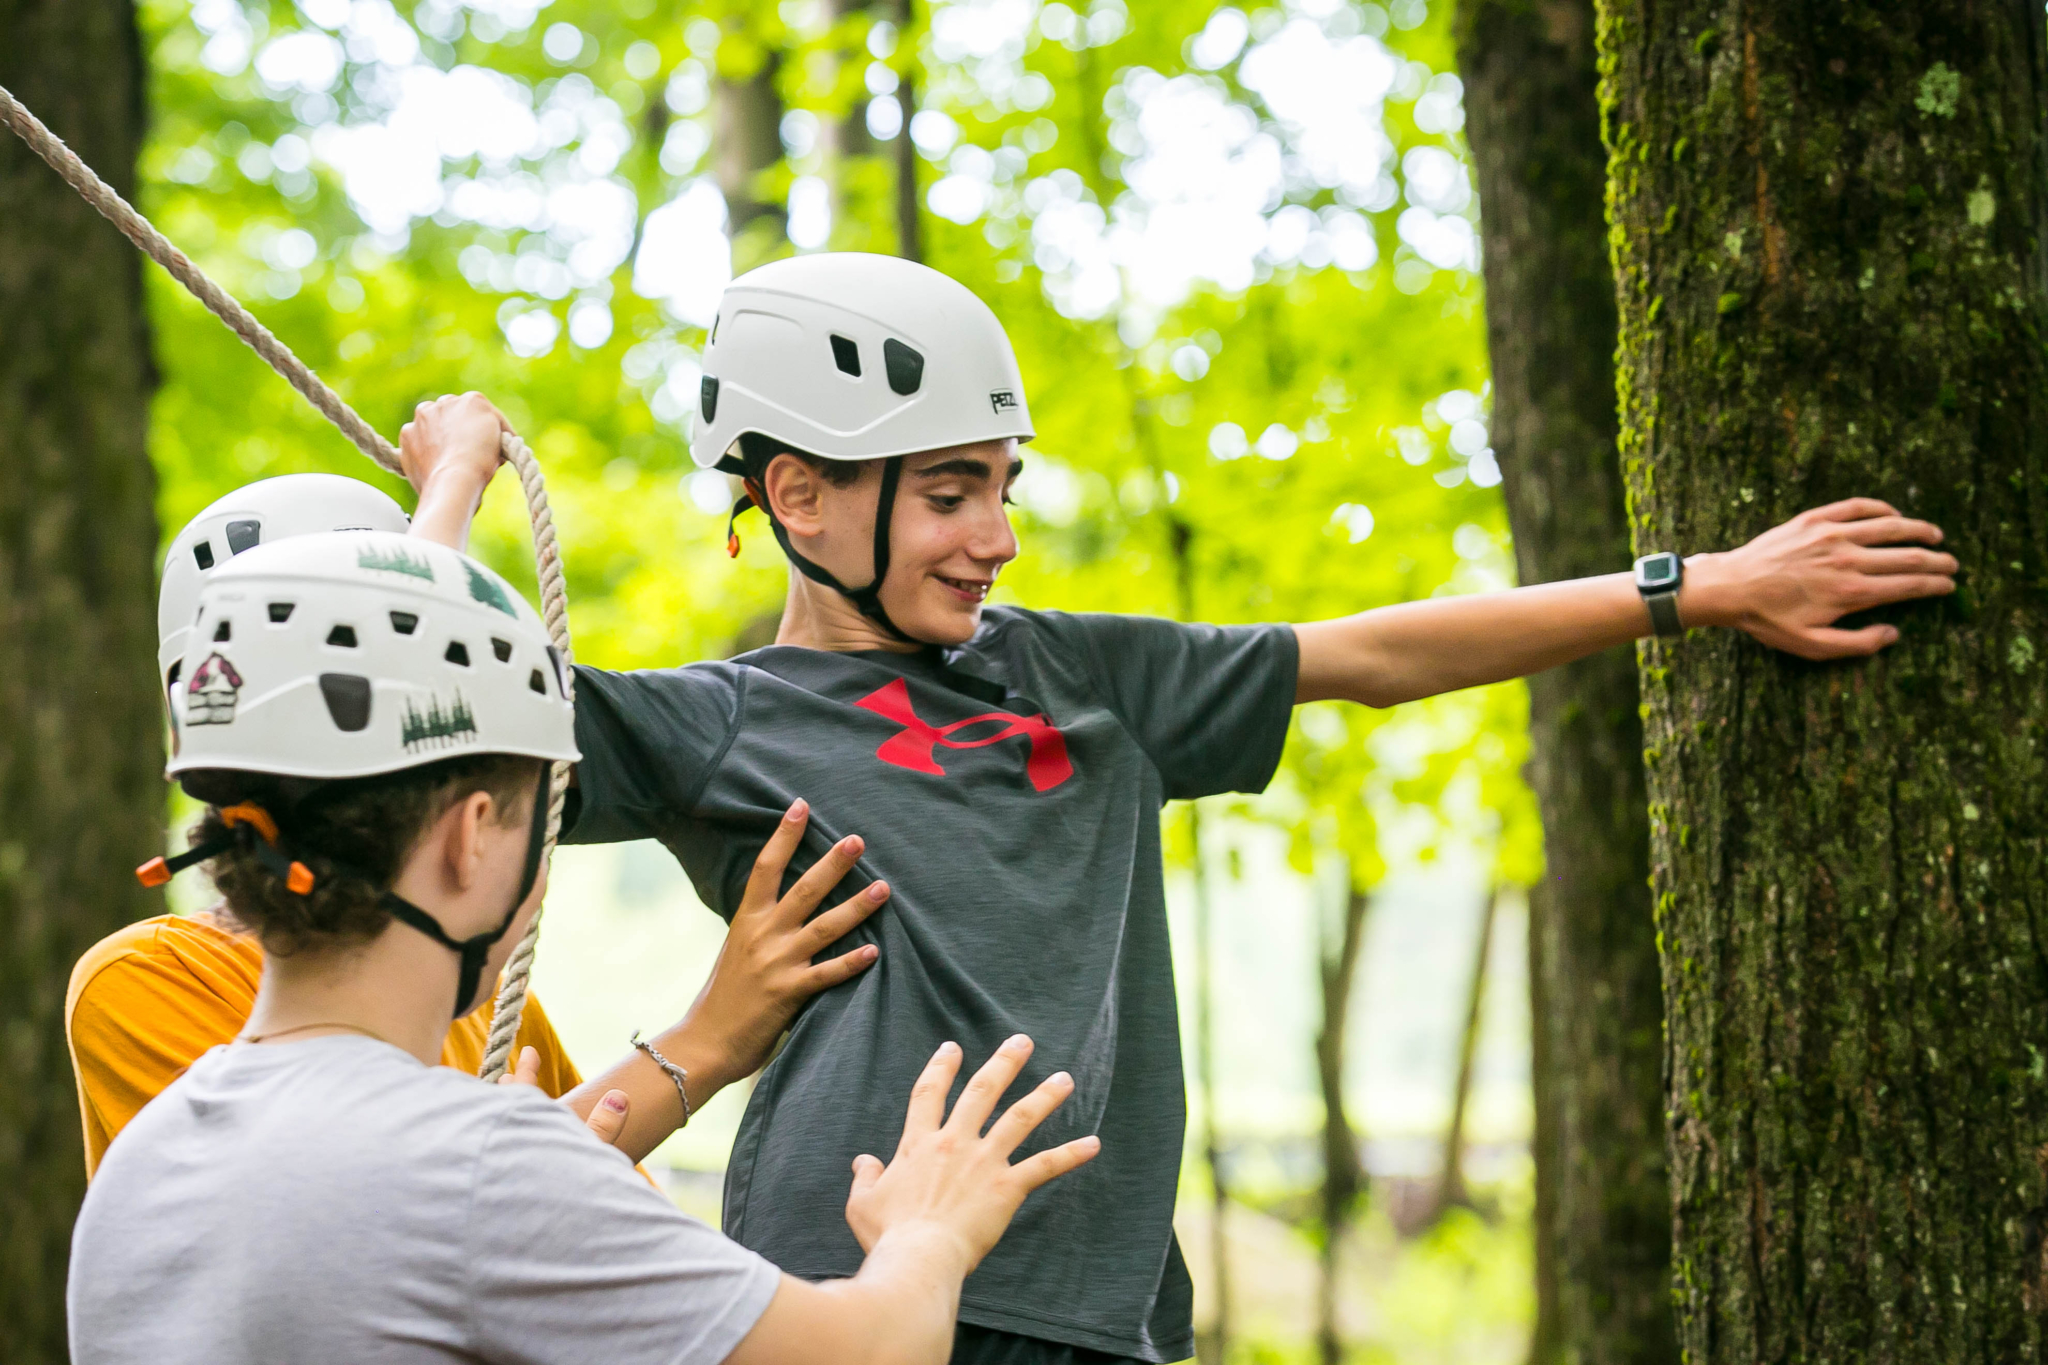 Camper on the ropes course being spotted and supported by another camper and staff member as they complete the challenge.